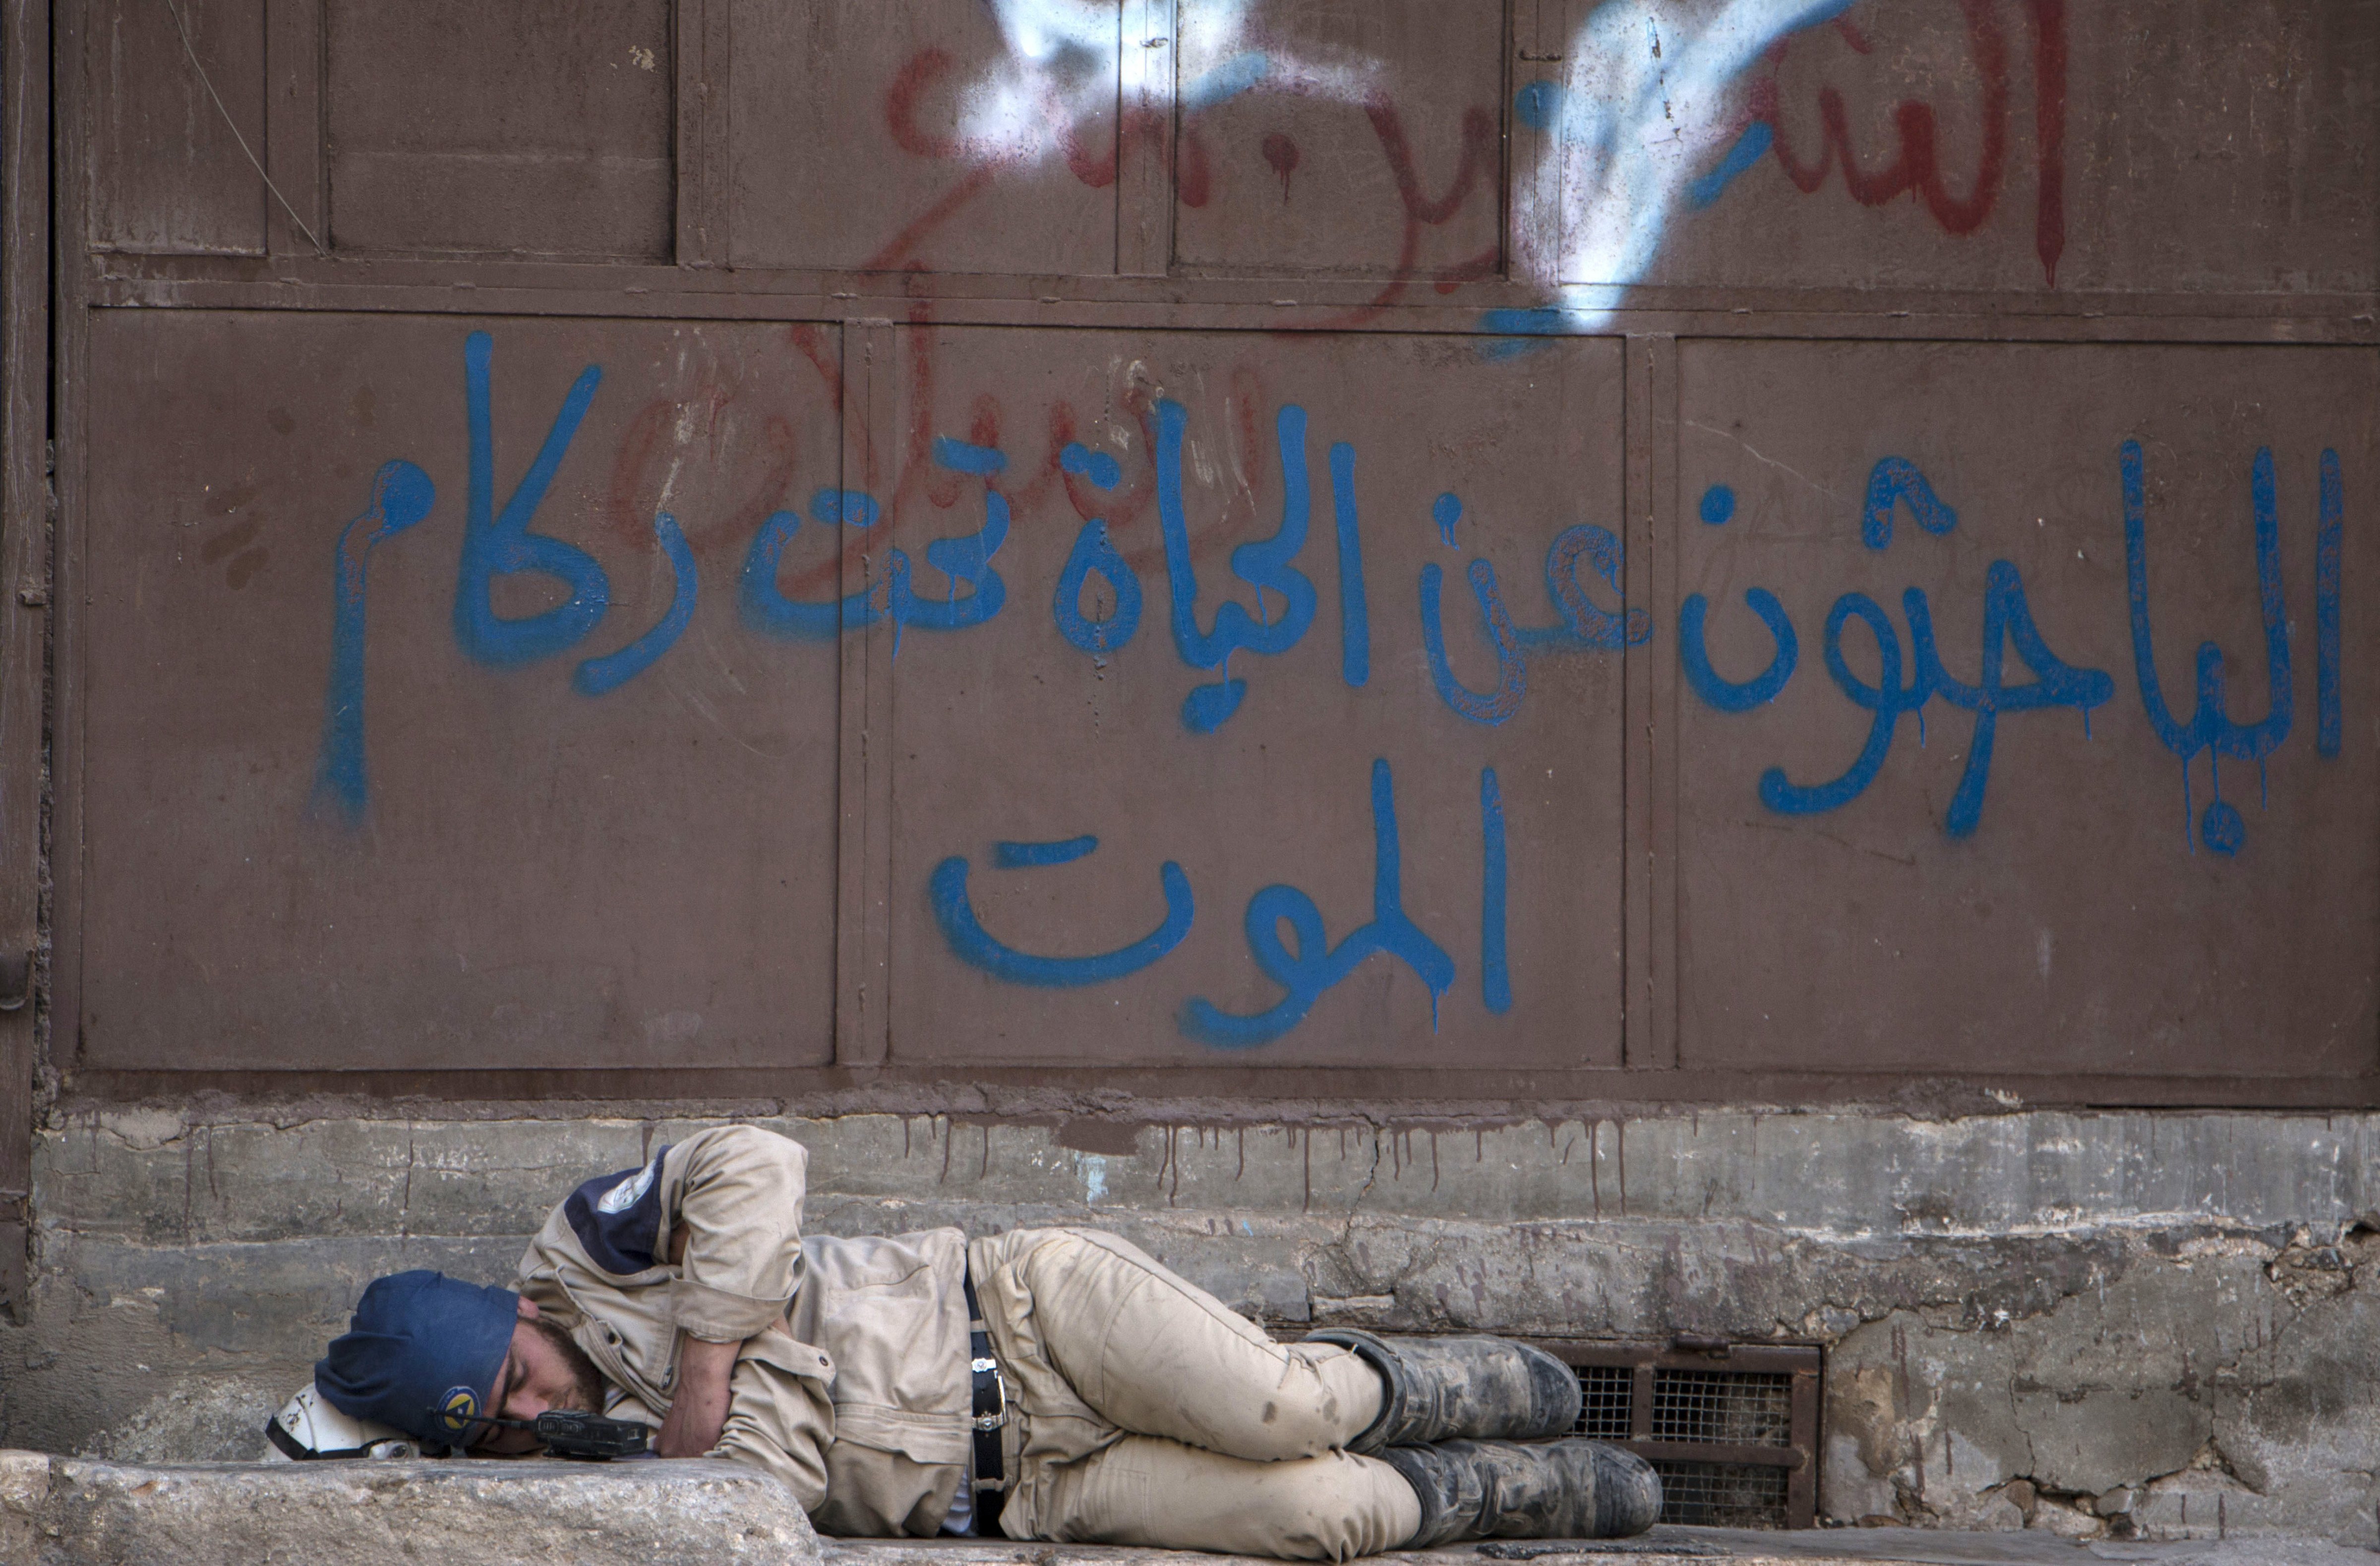 A member of the civil defense sleeps on the street in the rebel-held side of Syria's northern city of Aleppo on June 8, 2015, the Arabic graffiti in blue reads: "Those looking for life under the rubble of death". (Karam Al-Masri—AFP/Getty Images)